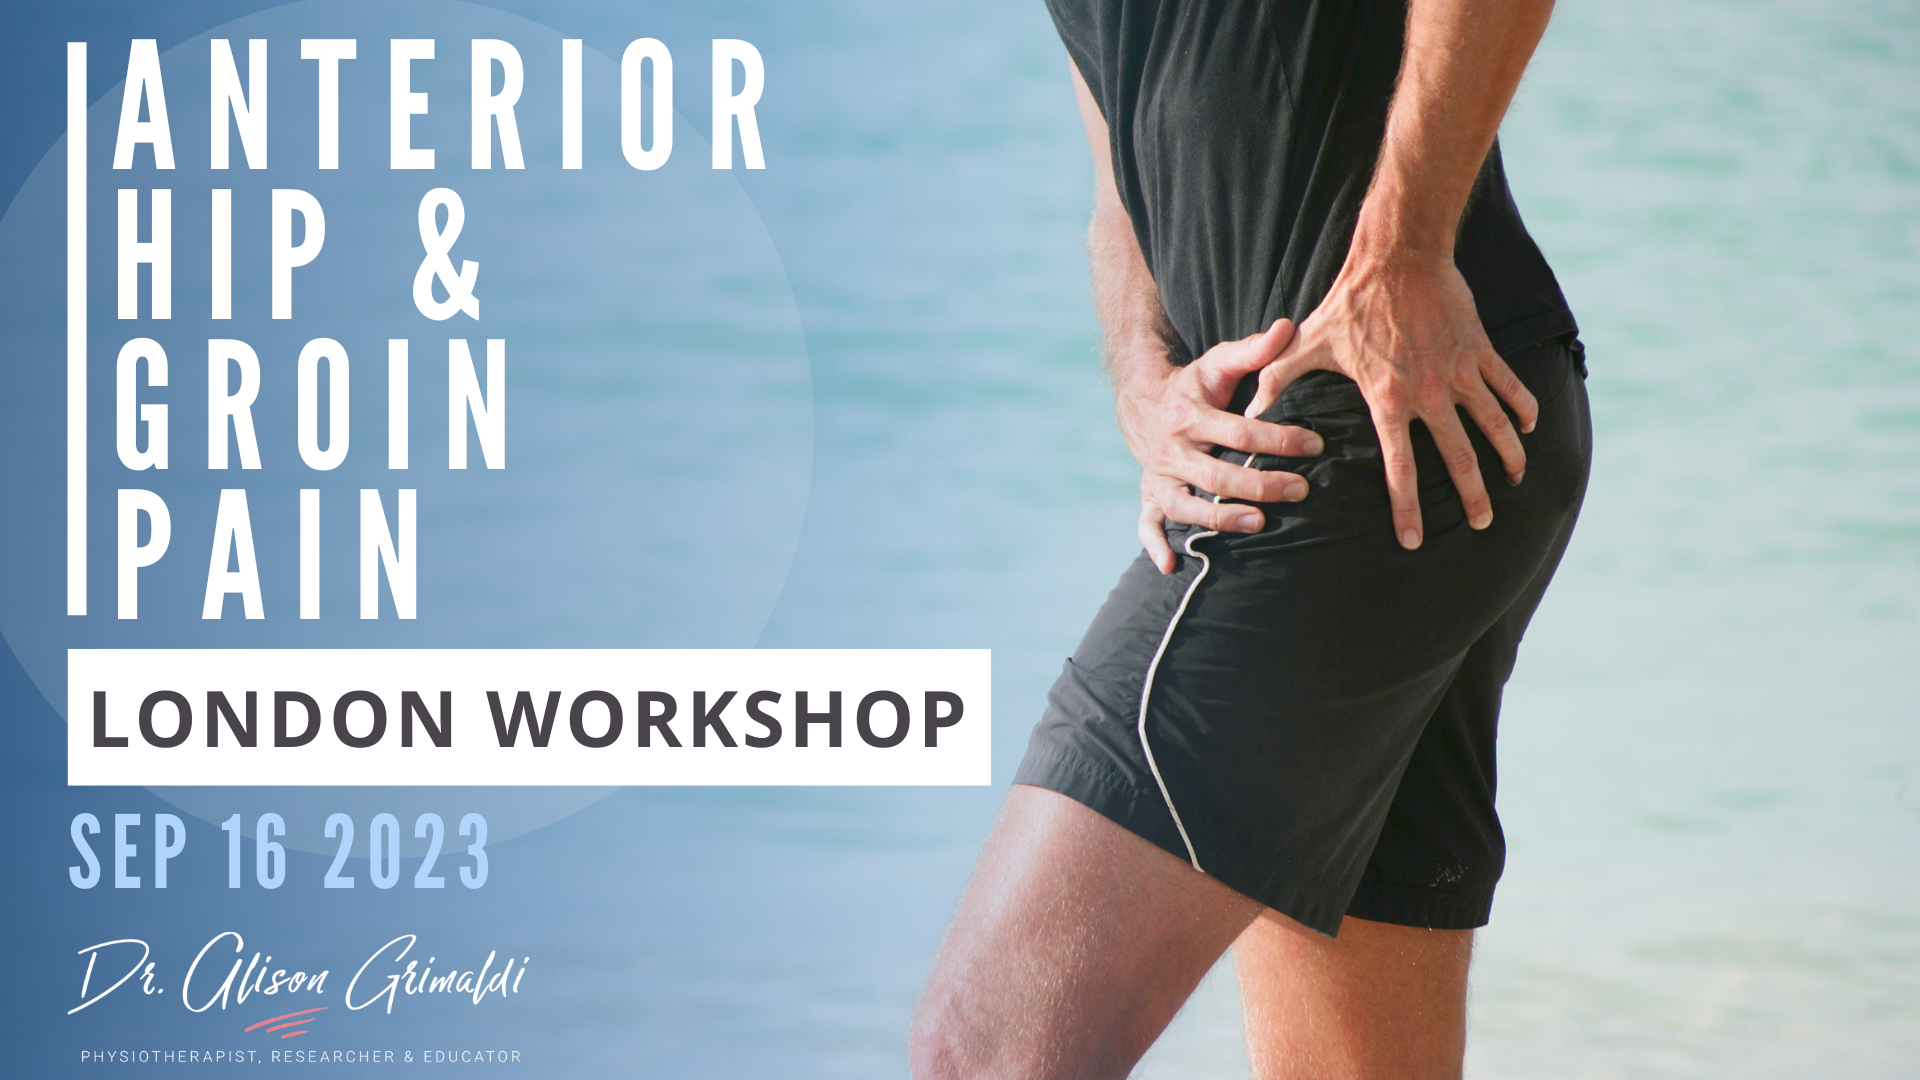 Anterior-Hip-and-Groin-Pain-Workshop-2-London-2023